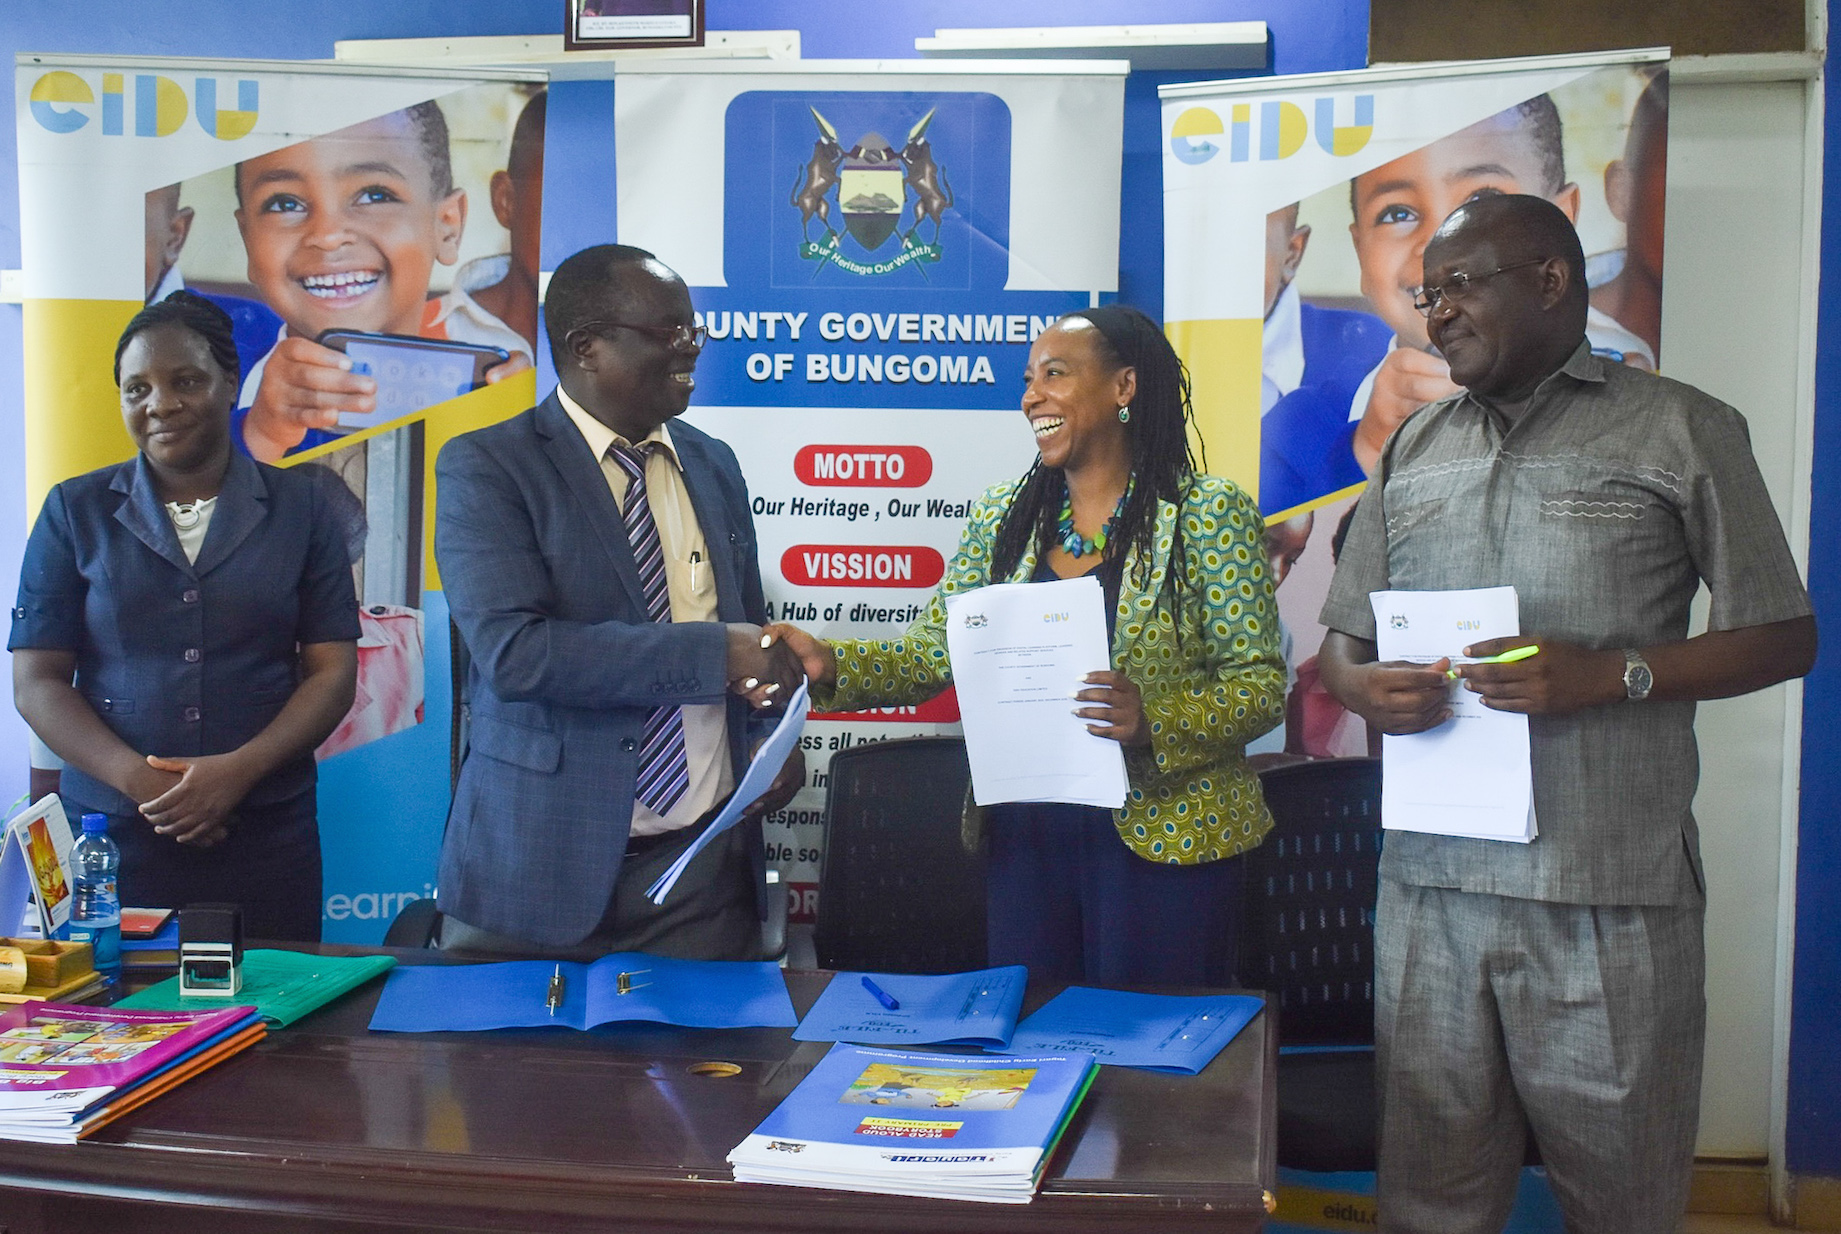 Dr. David Wanyonyi Bungoma CECM for Education and Vocational Training (second left) and EIDU Head of Government Relations, Salome Mwaura (second right) sign a contract to begin the implementation of EIDU’s digital learning program targeting over 3,000 learners from 36 Early Childhood Development and Education (ECDE) centres across the county. They are flanked by Abigael Walaka, Legal Officer- County Attorney office (left) and Nicholas Misoi, Chief Officer-Education. Over 230,000 learners from seven counties across Kenya are already using the program.